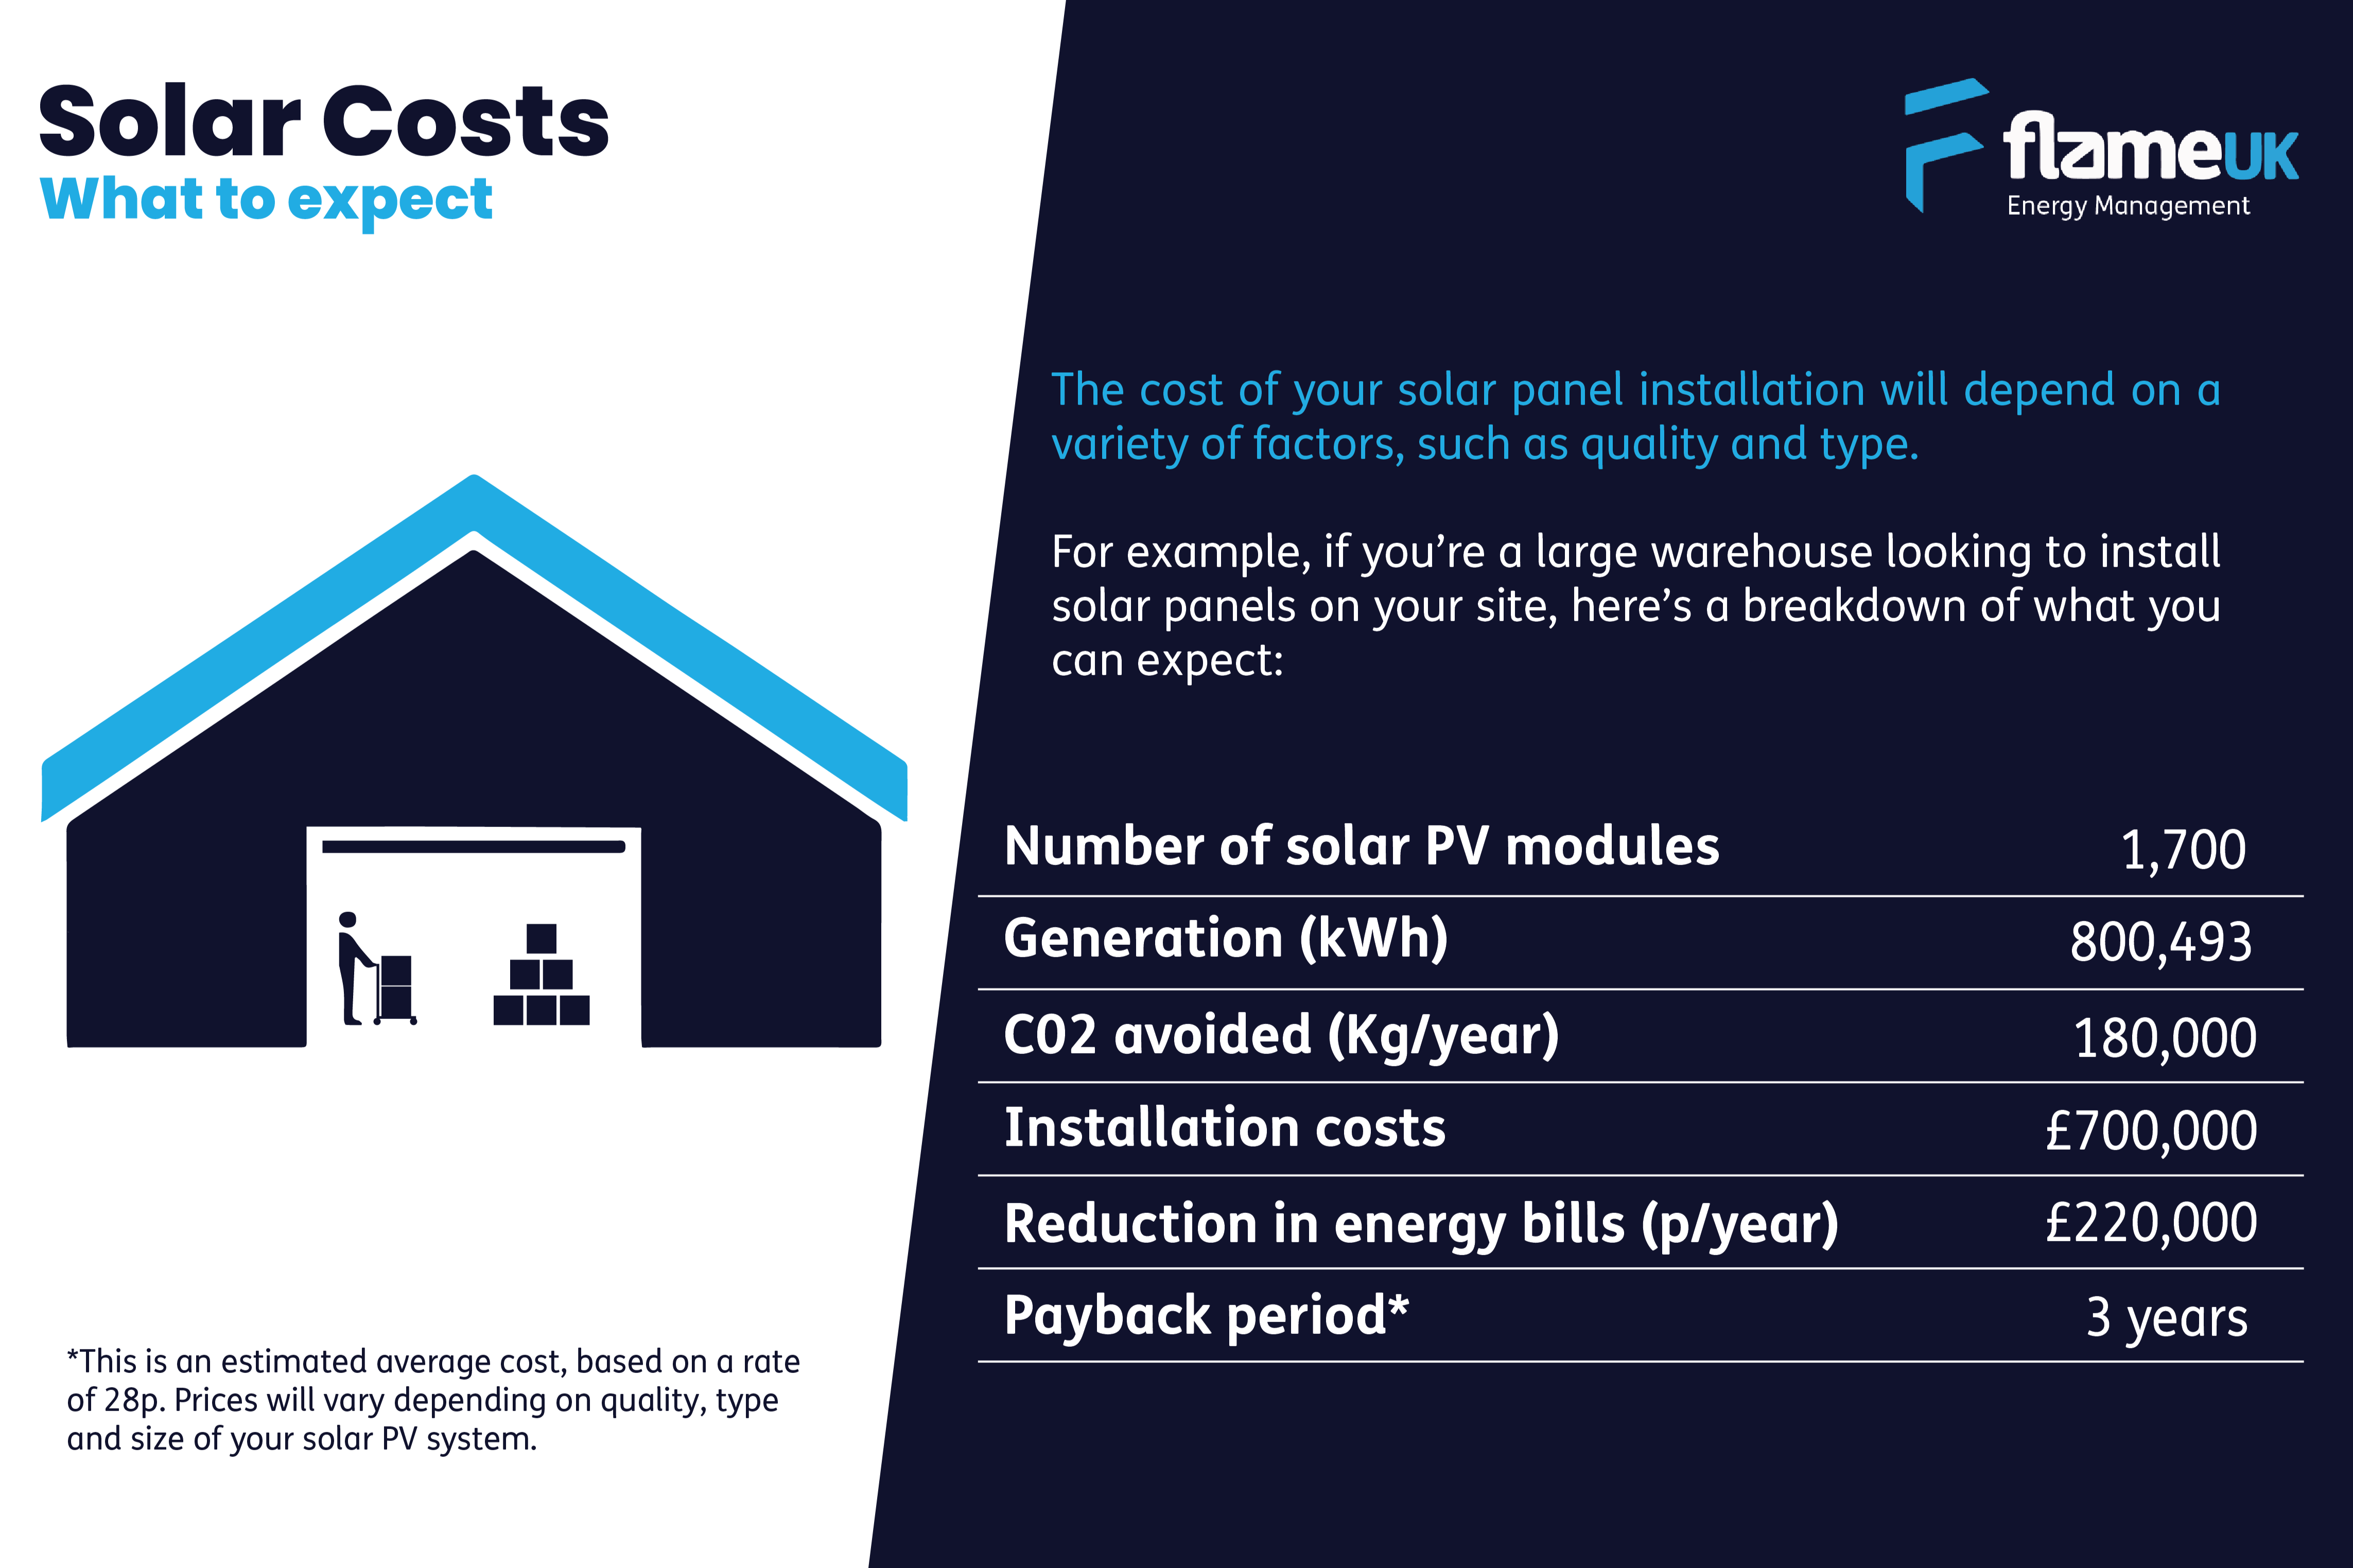 A graphic to show the expected costs for installing solar panels